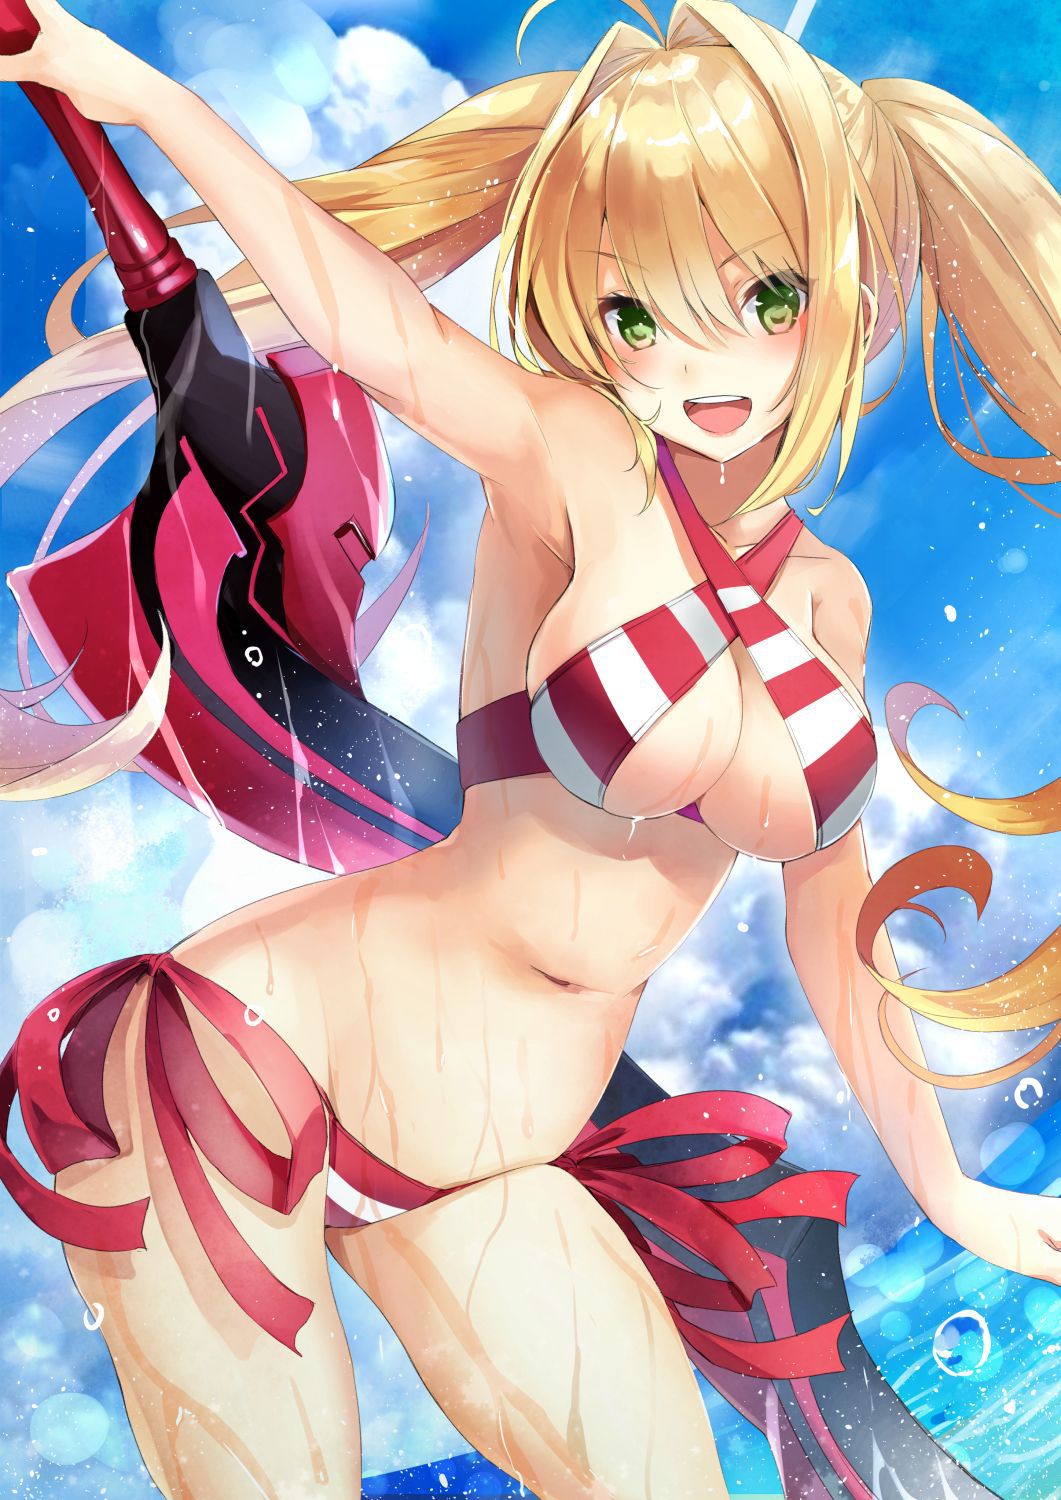 [Secondary ZIP] is about to start anime 100 pieces of cute image summary of Nero Claudius so soon 65